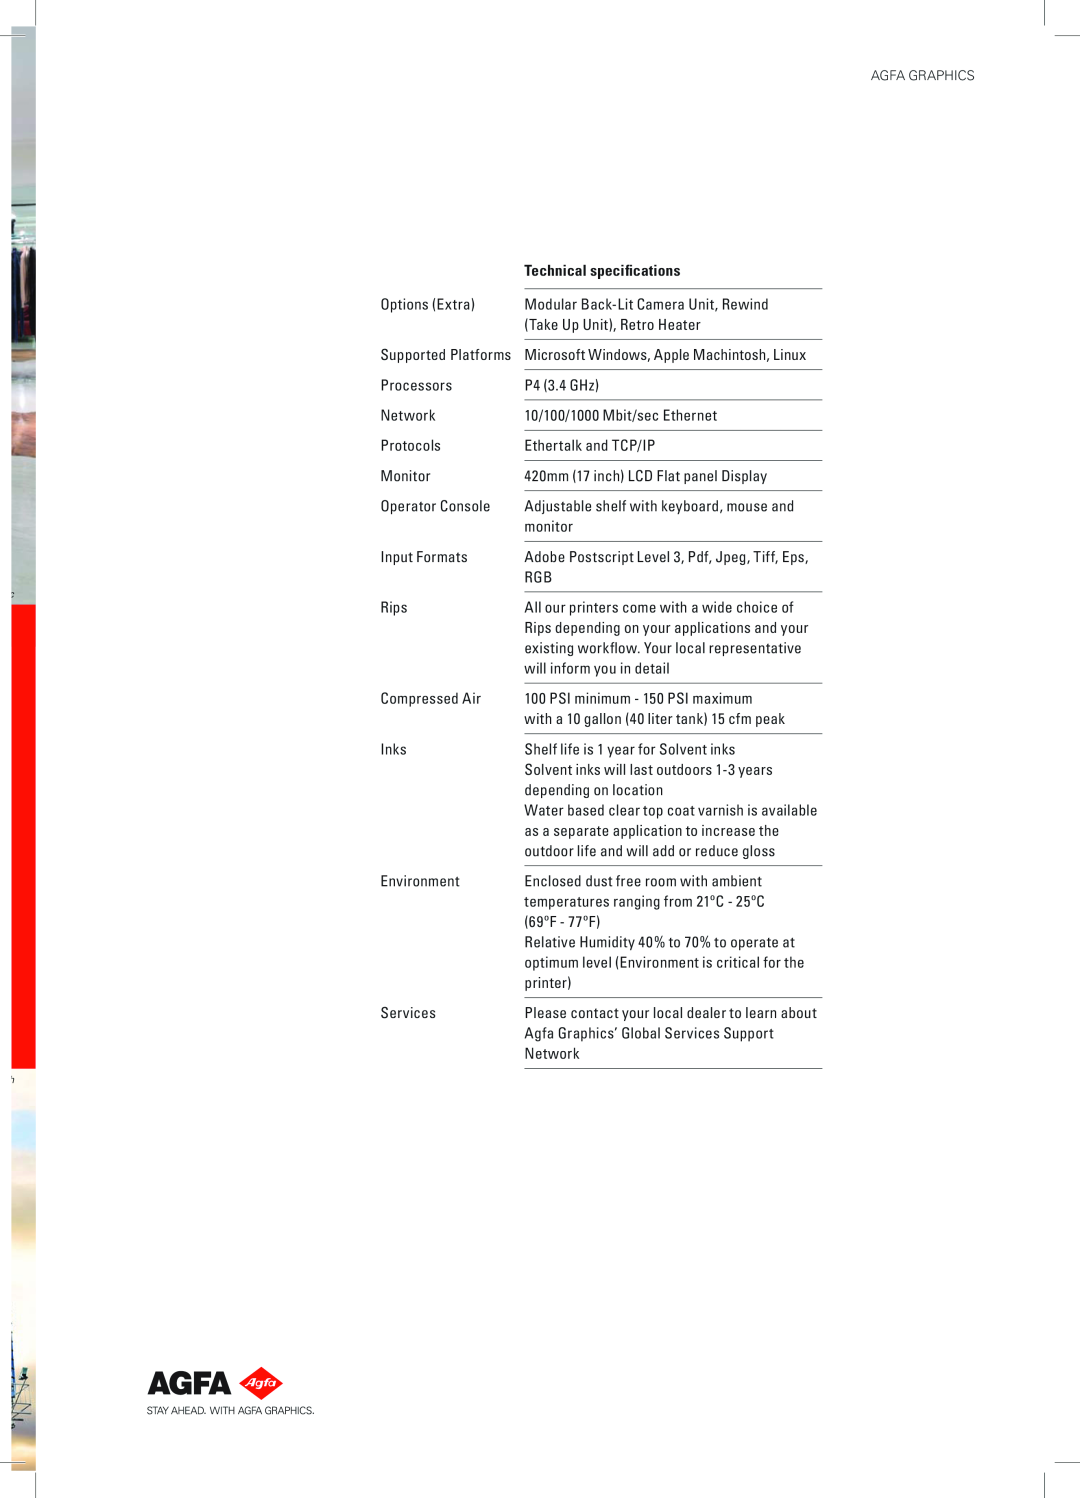 AGFA JETI 5024 manual Technical specifications 